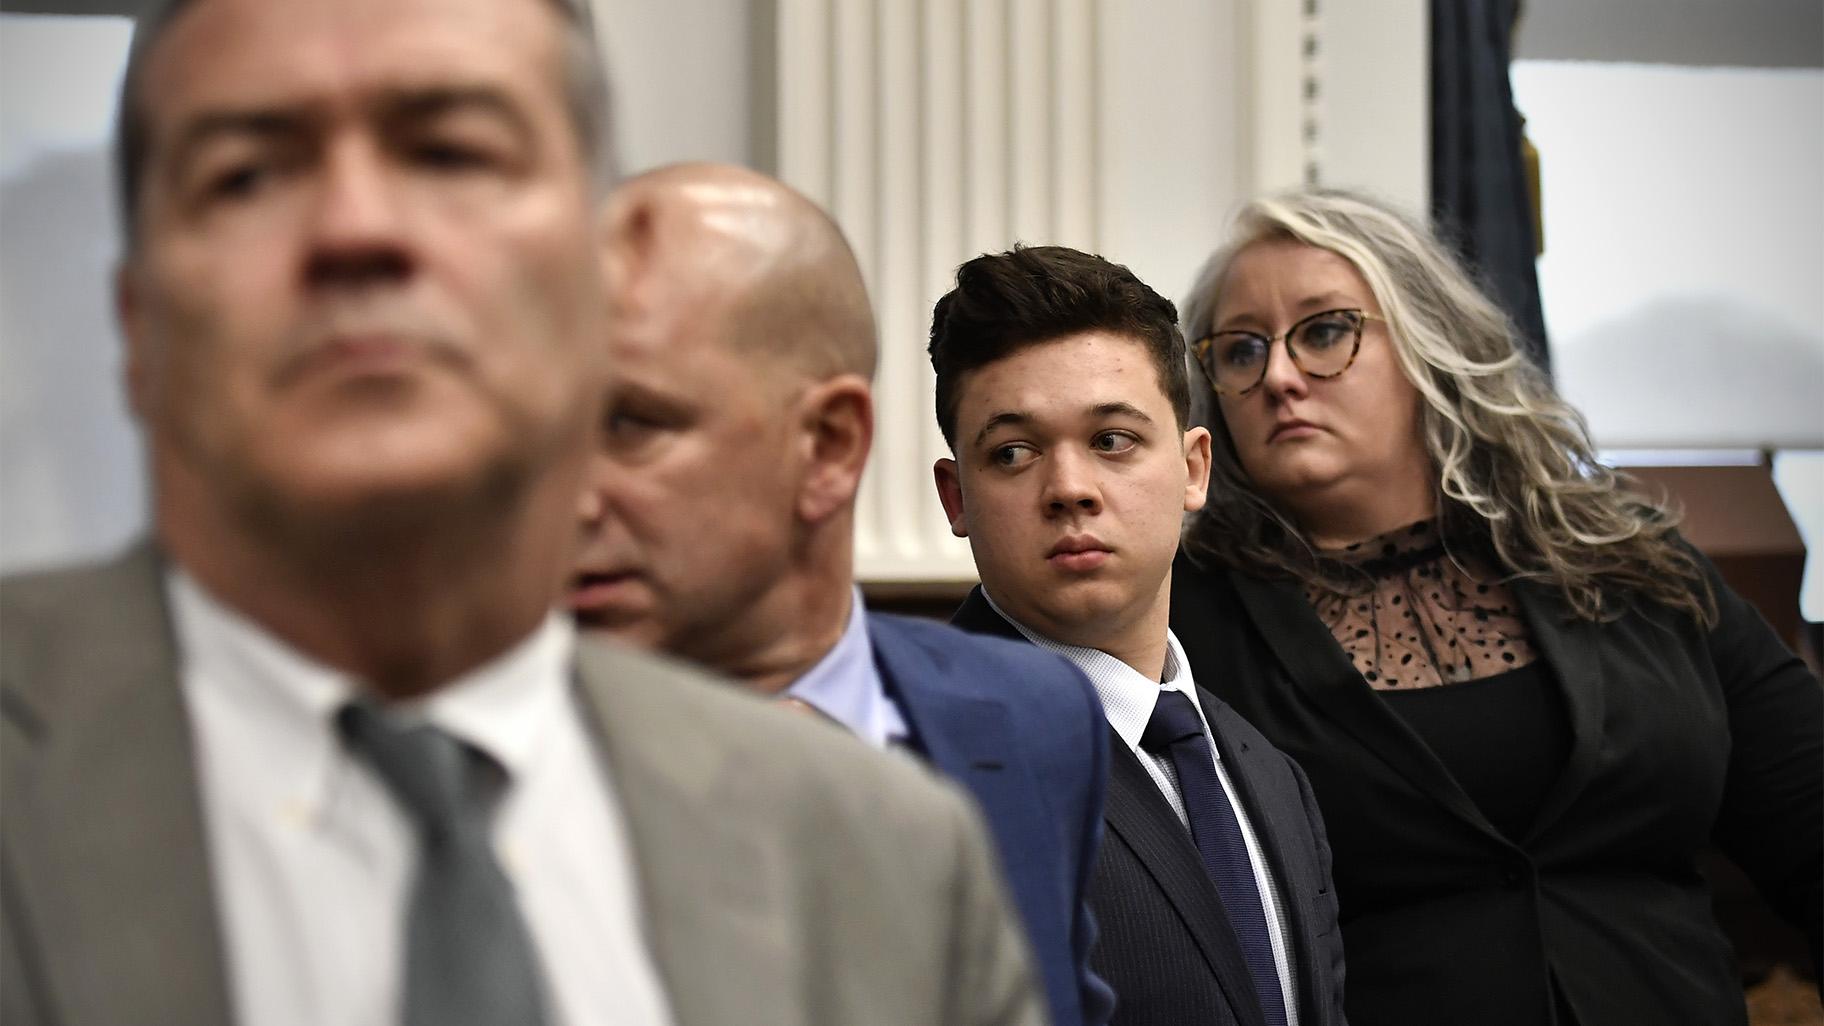 Kyle Rittenhouse, third from left, stands with his legal team, from left, Mark Richards, Corey Chirafisi and Natalie Wisco as the jury leaves the room for the day at the Kenosha County Courthouse in Kenosha, Wis., on Friday, Nov. 5, 2021. (Sean Krajacic / The Kenosha News via AP, Pool)